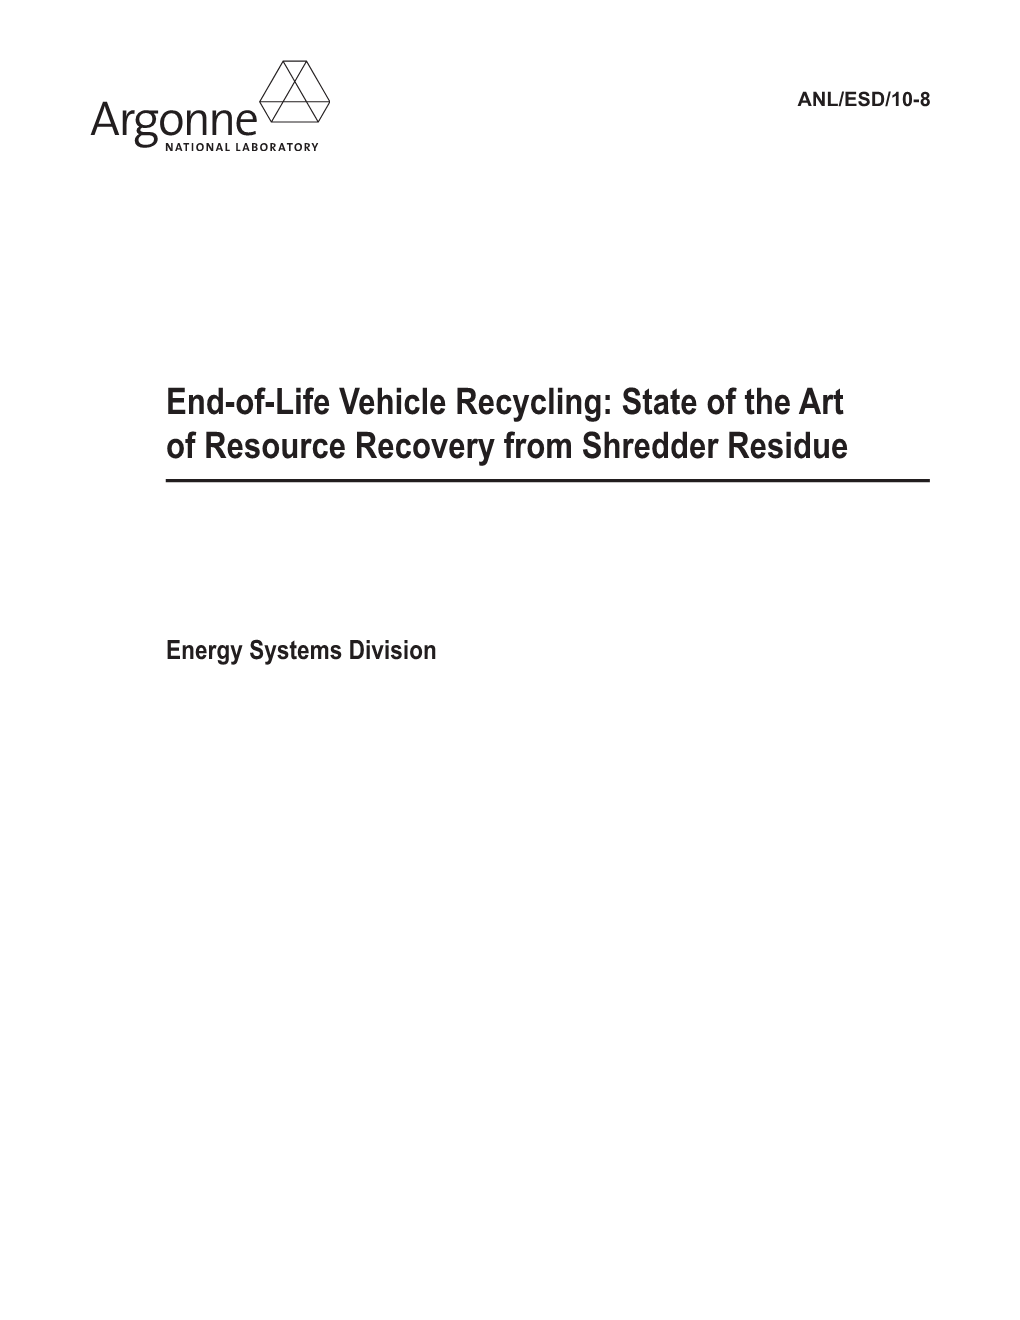 End-Of-Life Vehicle Recycling: State of the Art of Resource Recovery from Shredder Residue